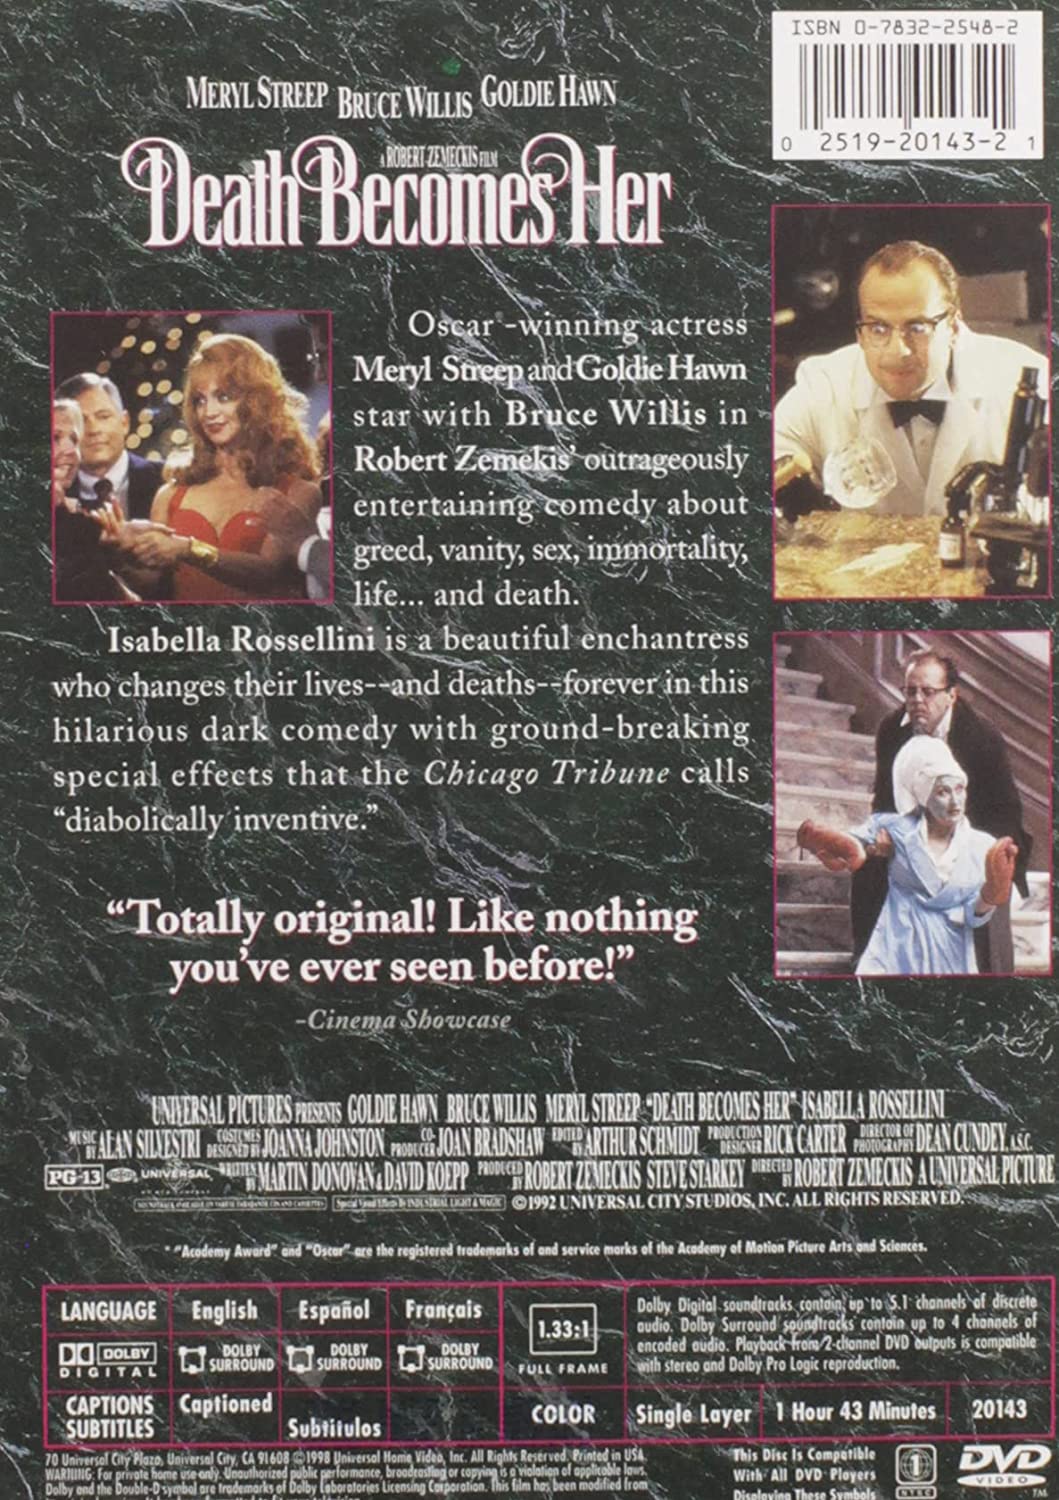 Death Becomes Her (DVD), Universal Studios, Comedy - image 6 of 6